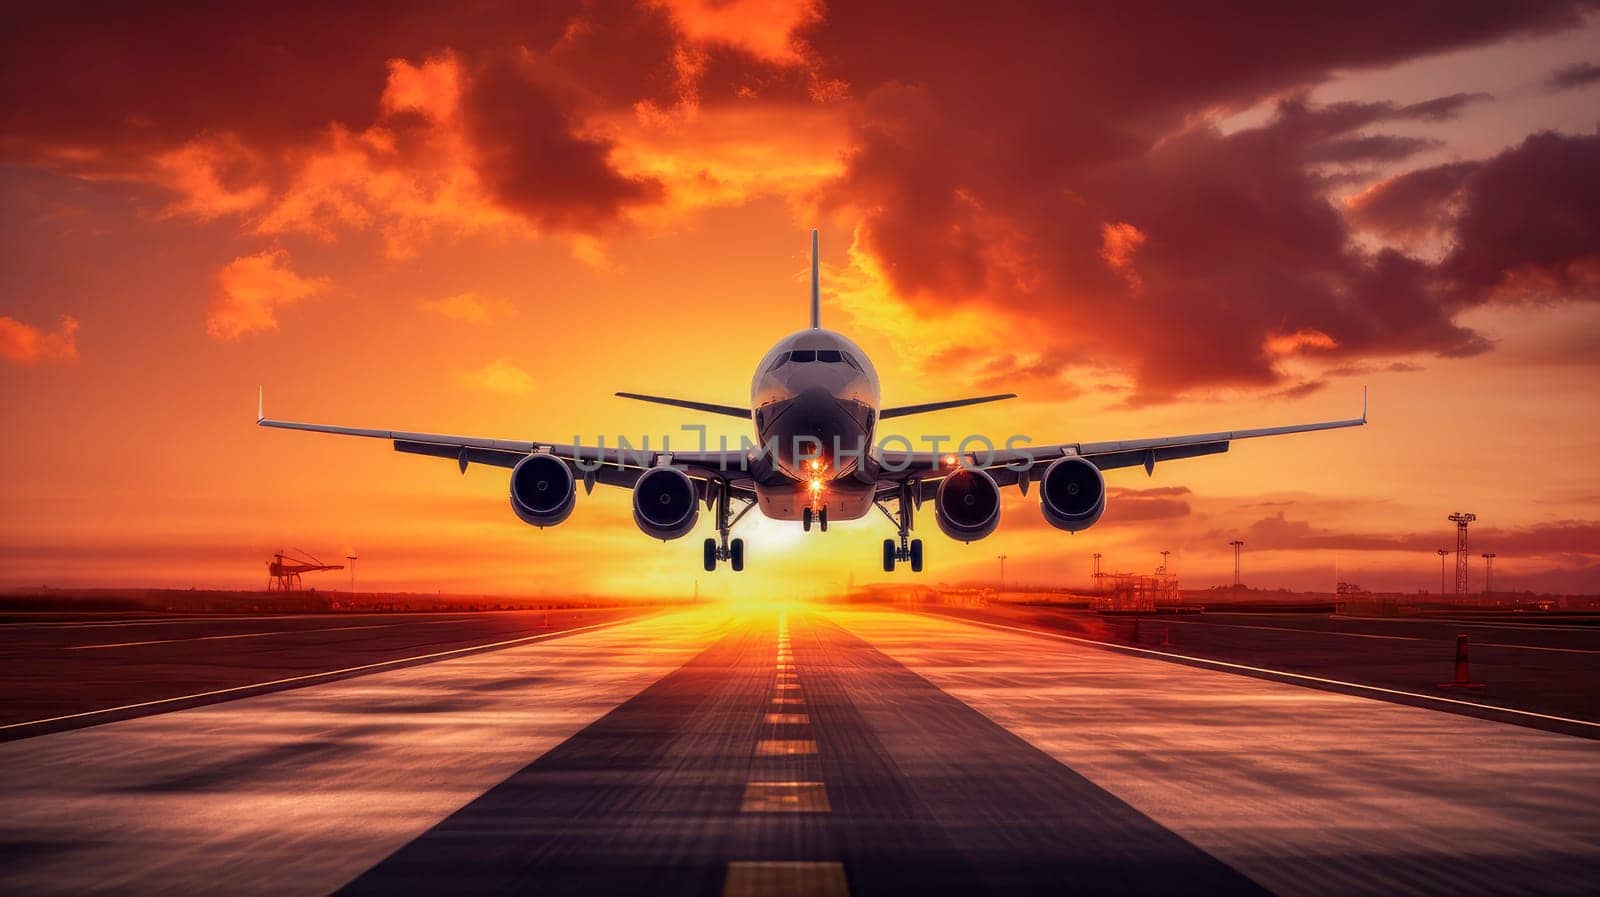 A passenger plane flying in the colorful sky. Aircraft takes off from the airport runway during the sunset. Beautiful landscape, picture, phone screensaver, copy space, advertising, travel agency, tourism, solitude with nature, without people